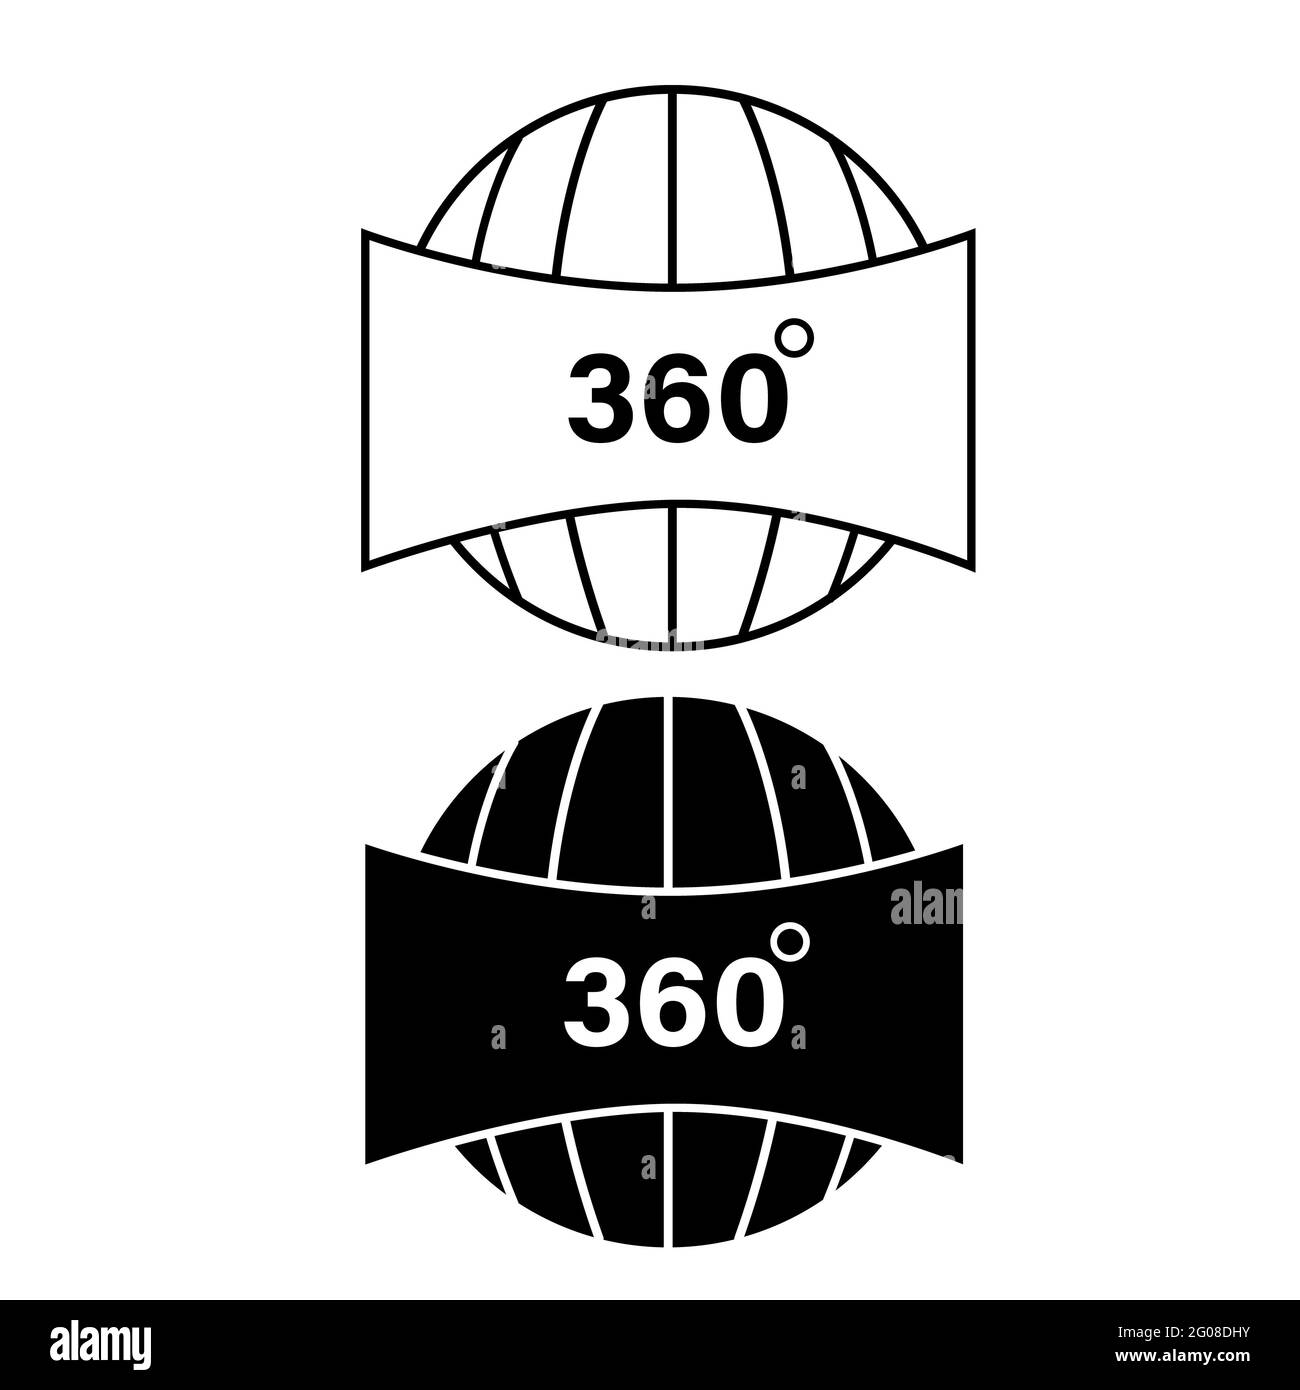 360 picture icon on white background. panorama view mode. 360 degree panorama sign. flat style. Stock Photo